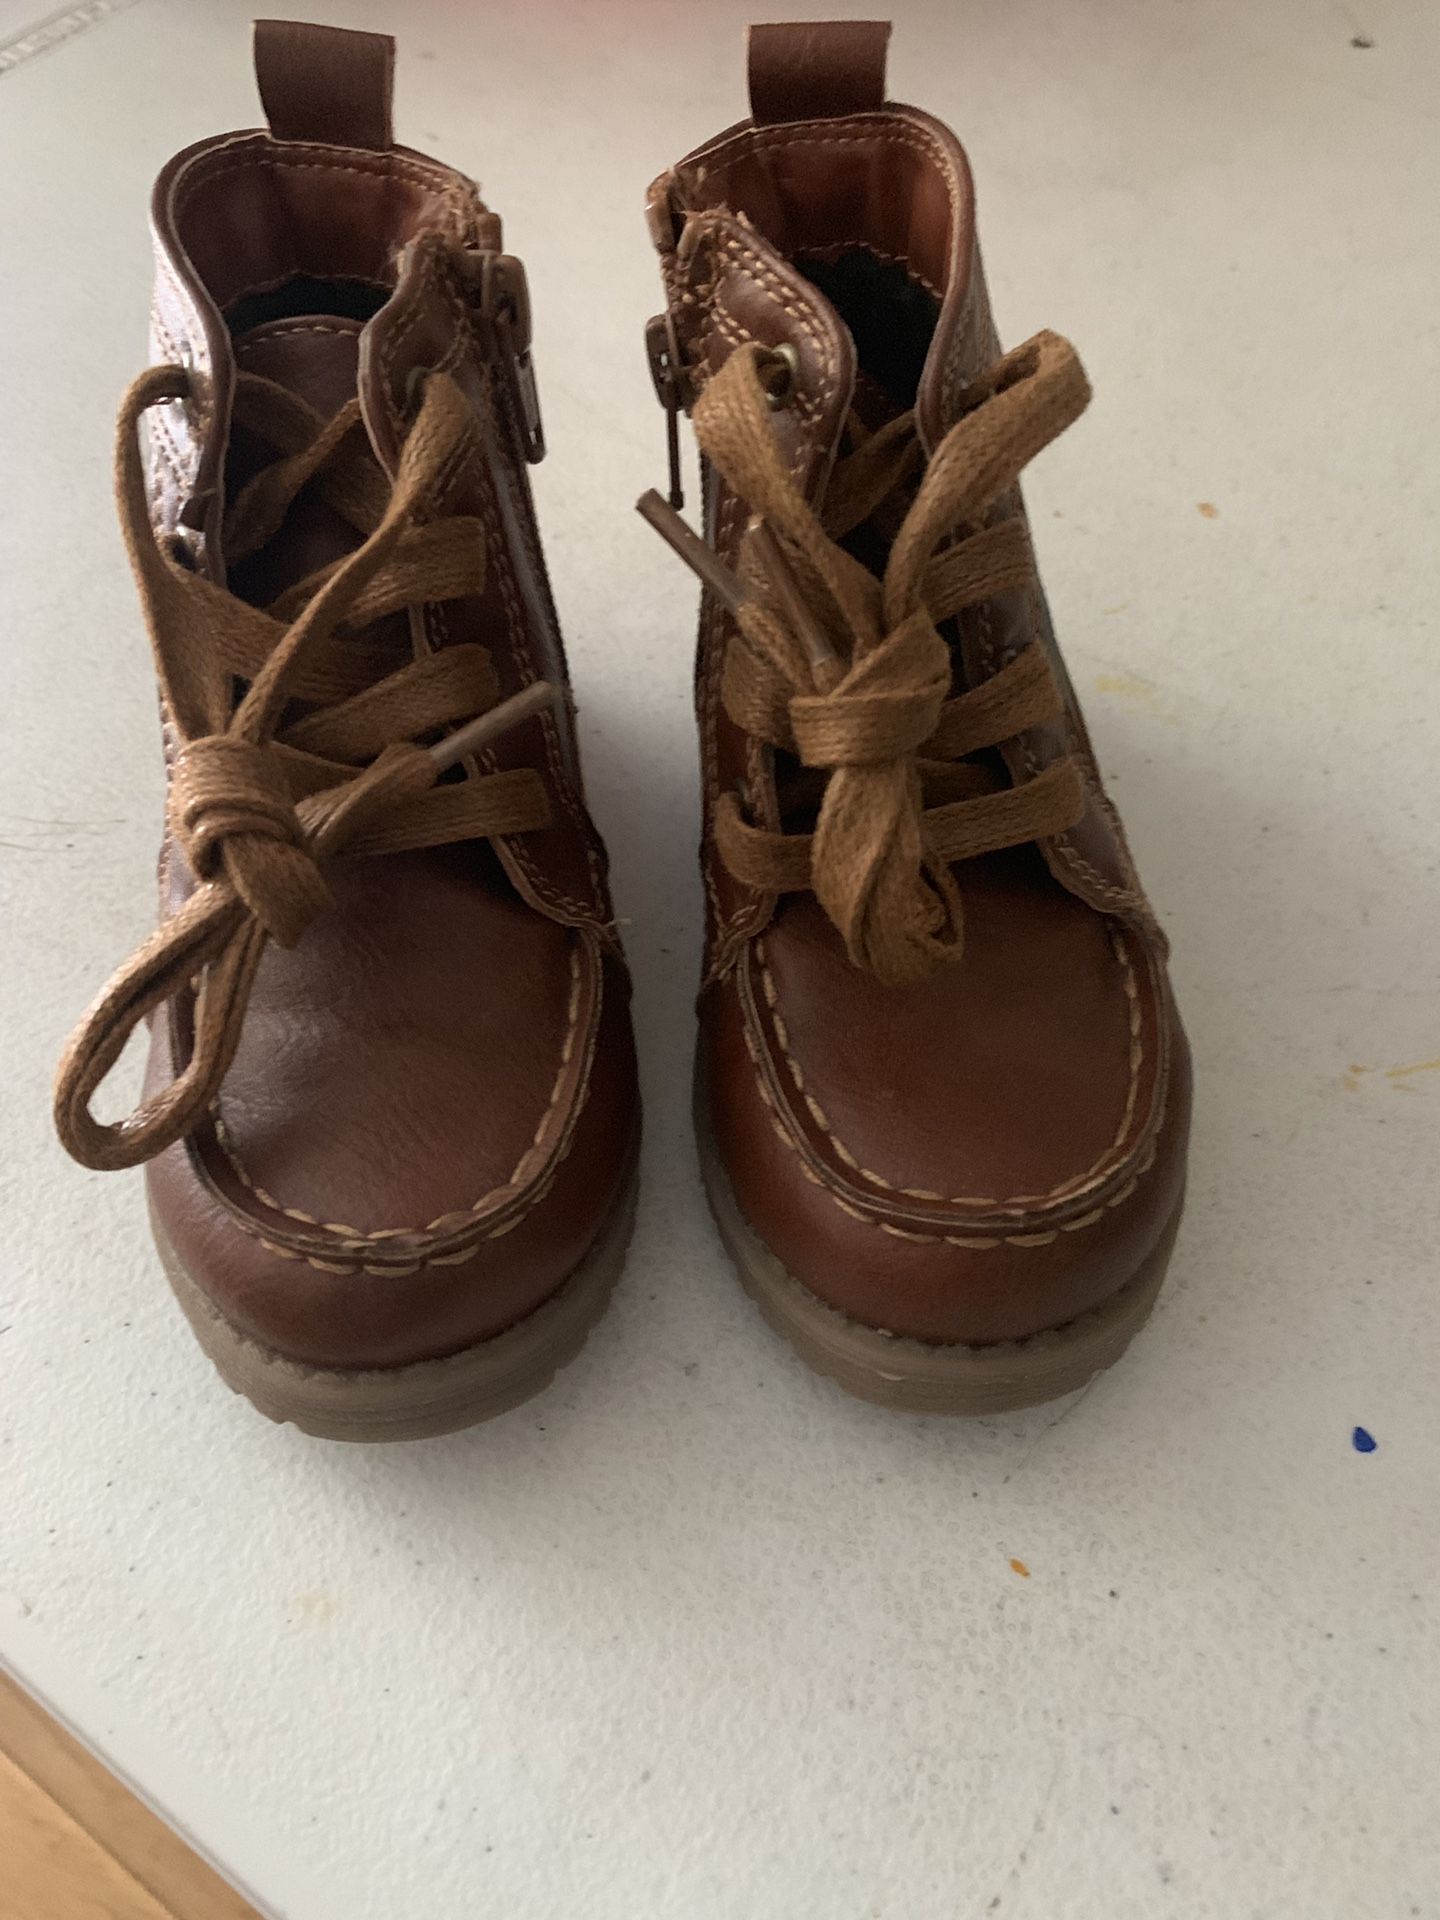 Toddler Boy Sneakers and Boots